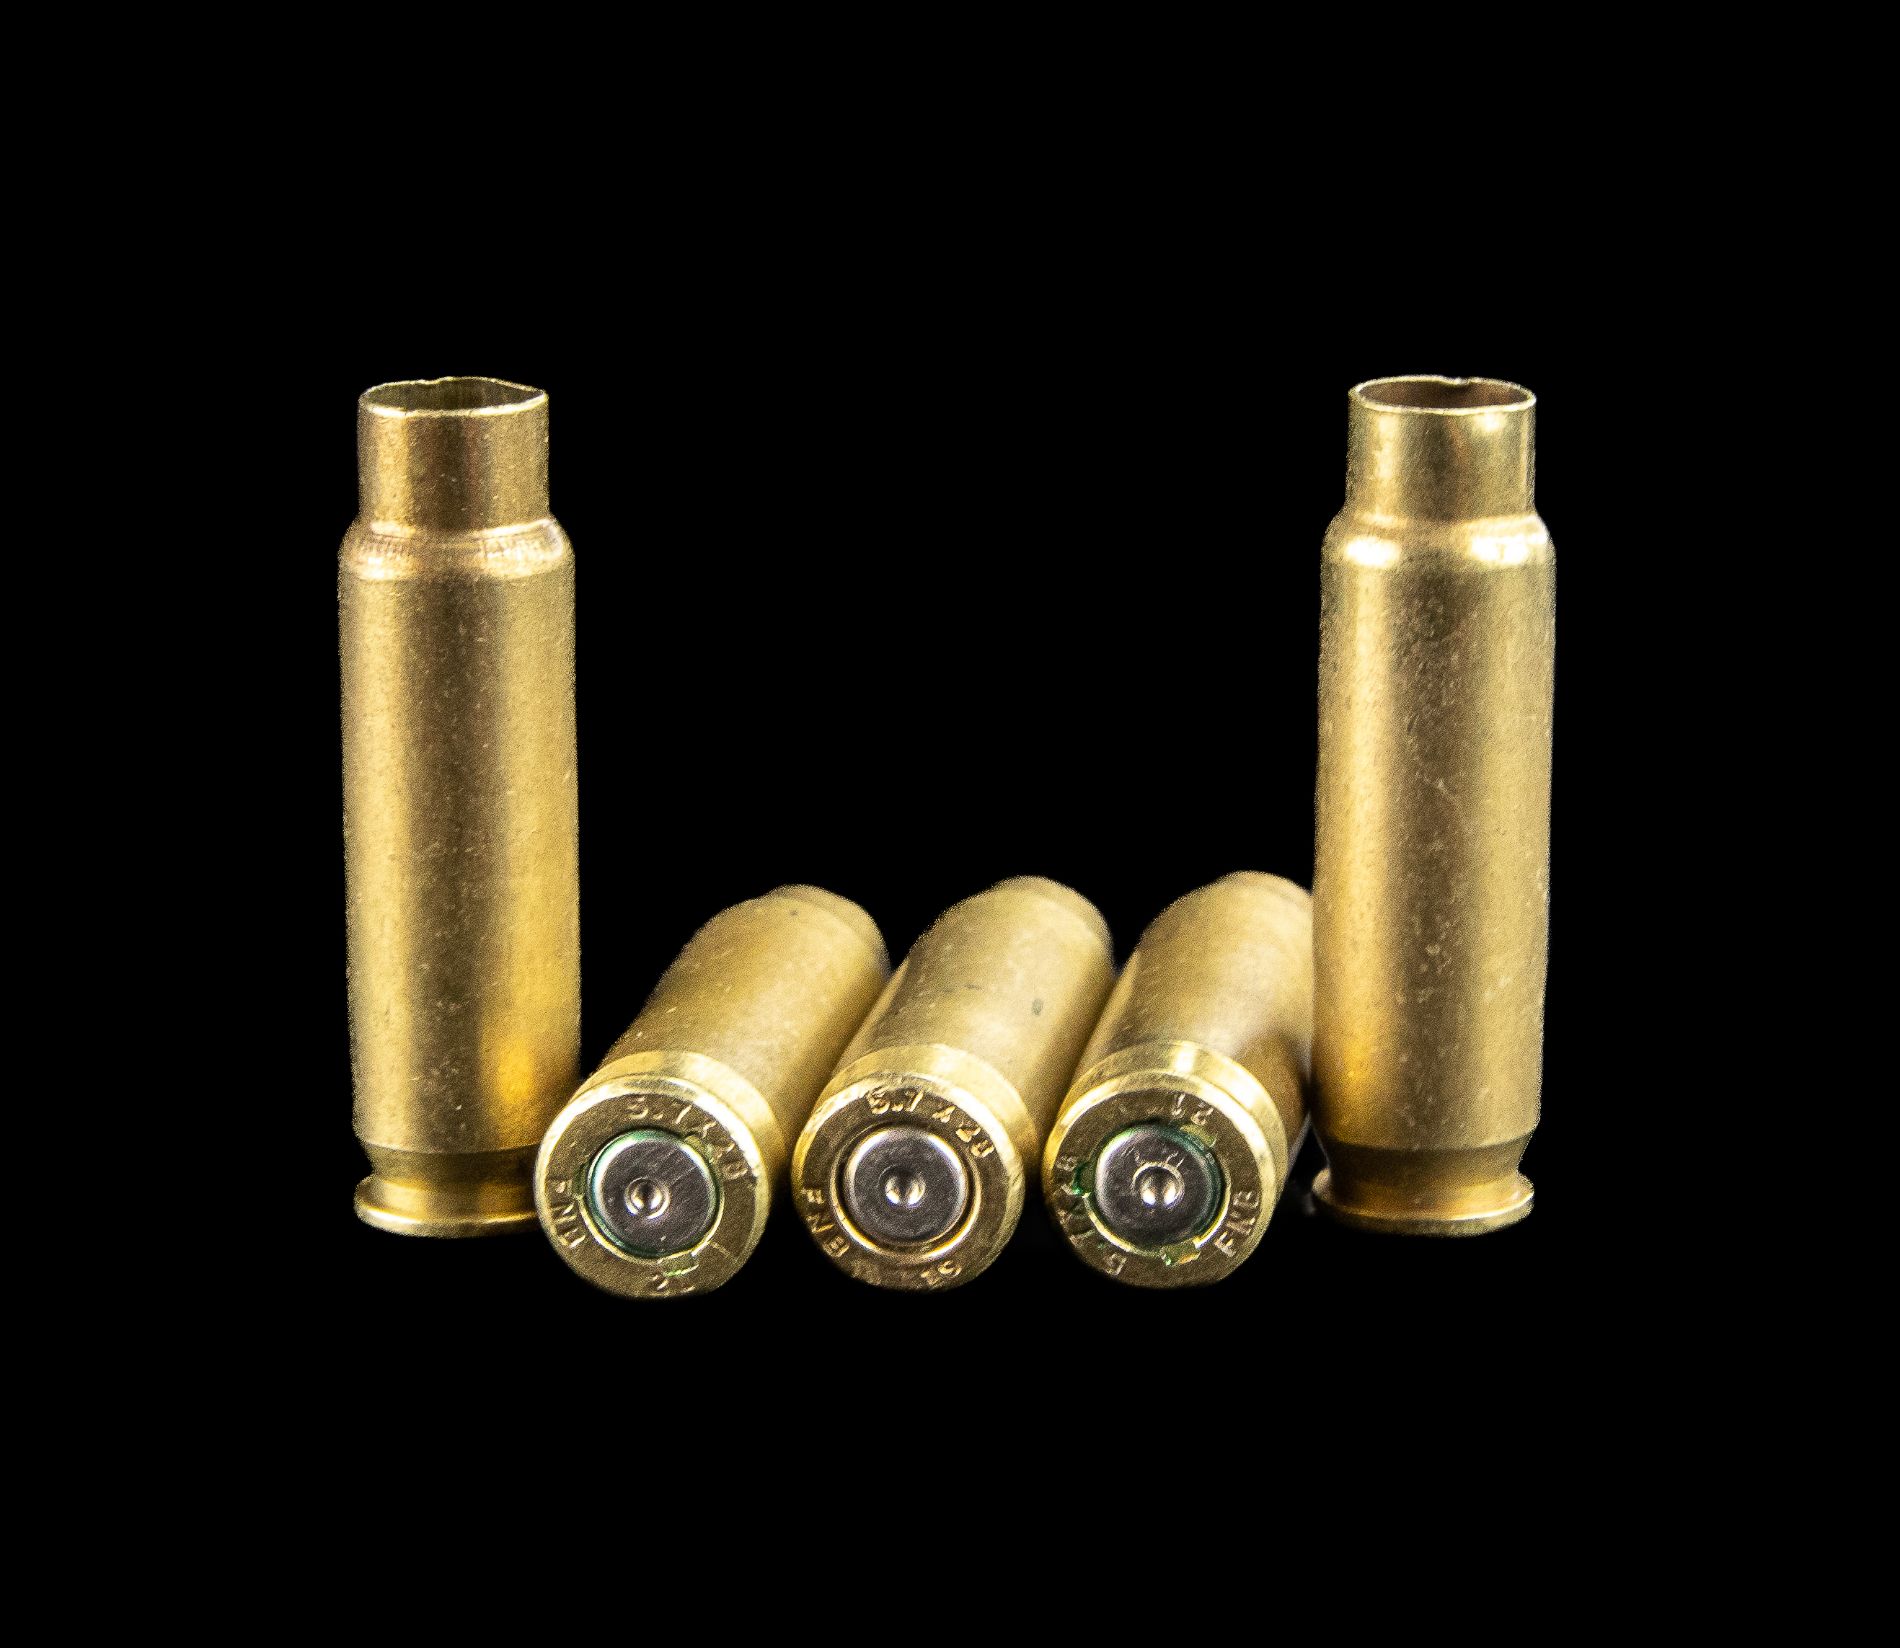 5.7x28 Bulk Brass Cases - 1000 Pieces - Uncleaned To Retain Finish